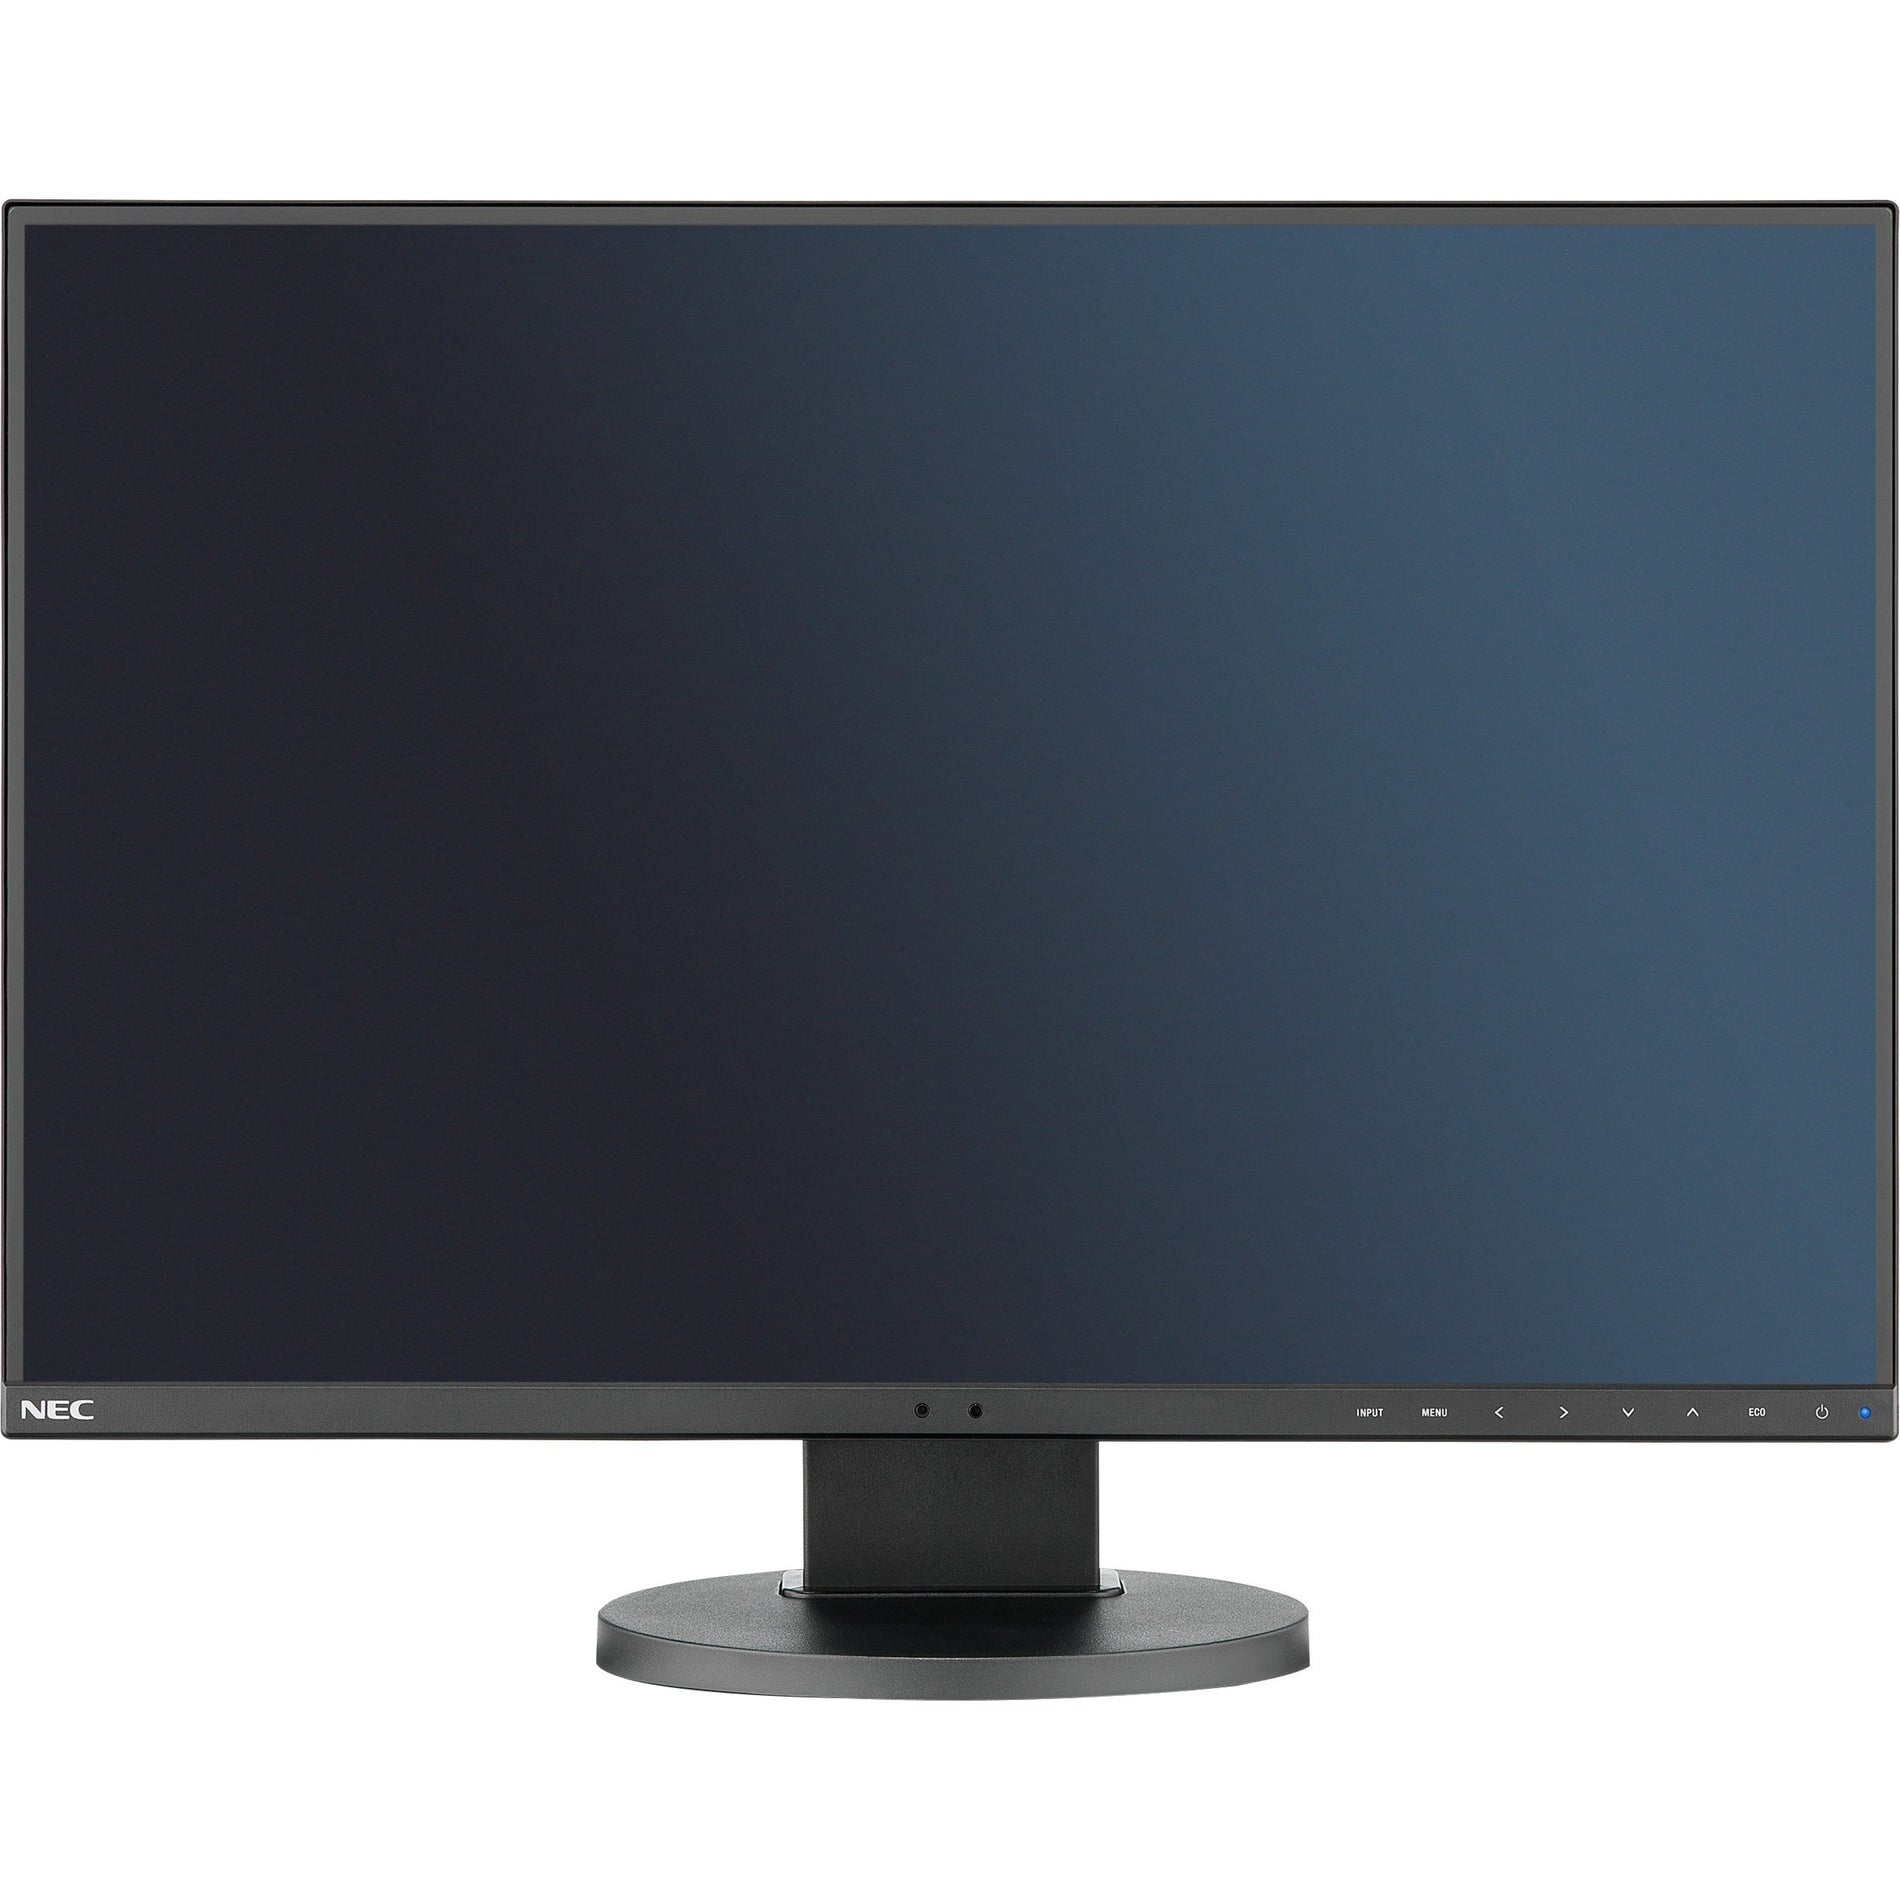 NEC Display EA245WMI-BK-SV 24" Widescreen IPS Desktop Monitor with SpectraViewII Color Calibration, 1920 x 1200, 300 Nit, 1,000:1, 16.7 Million Colors